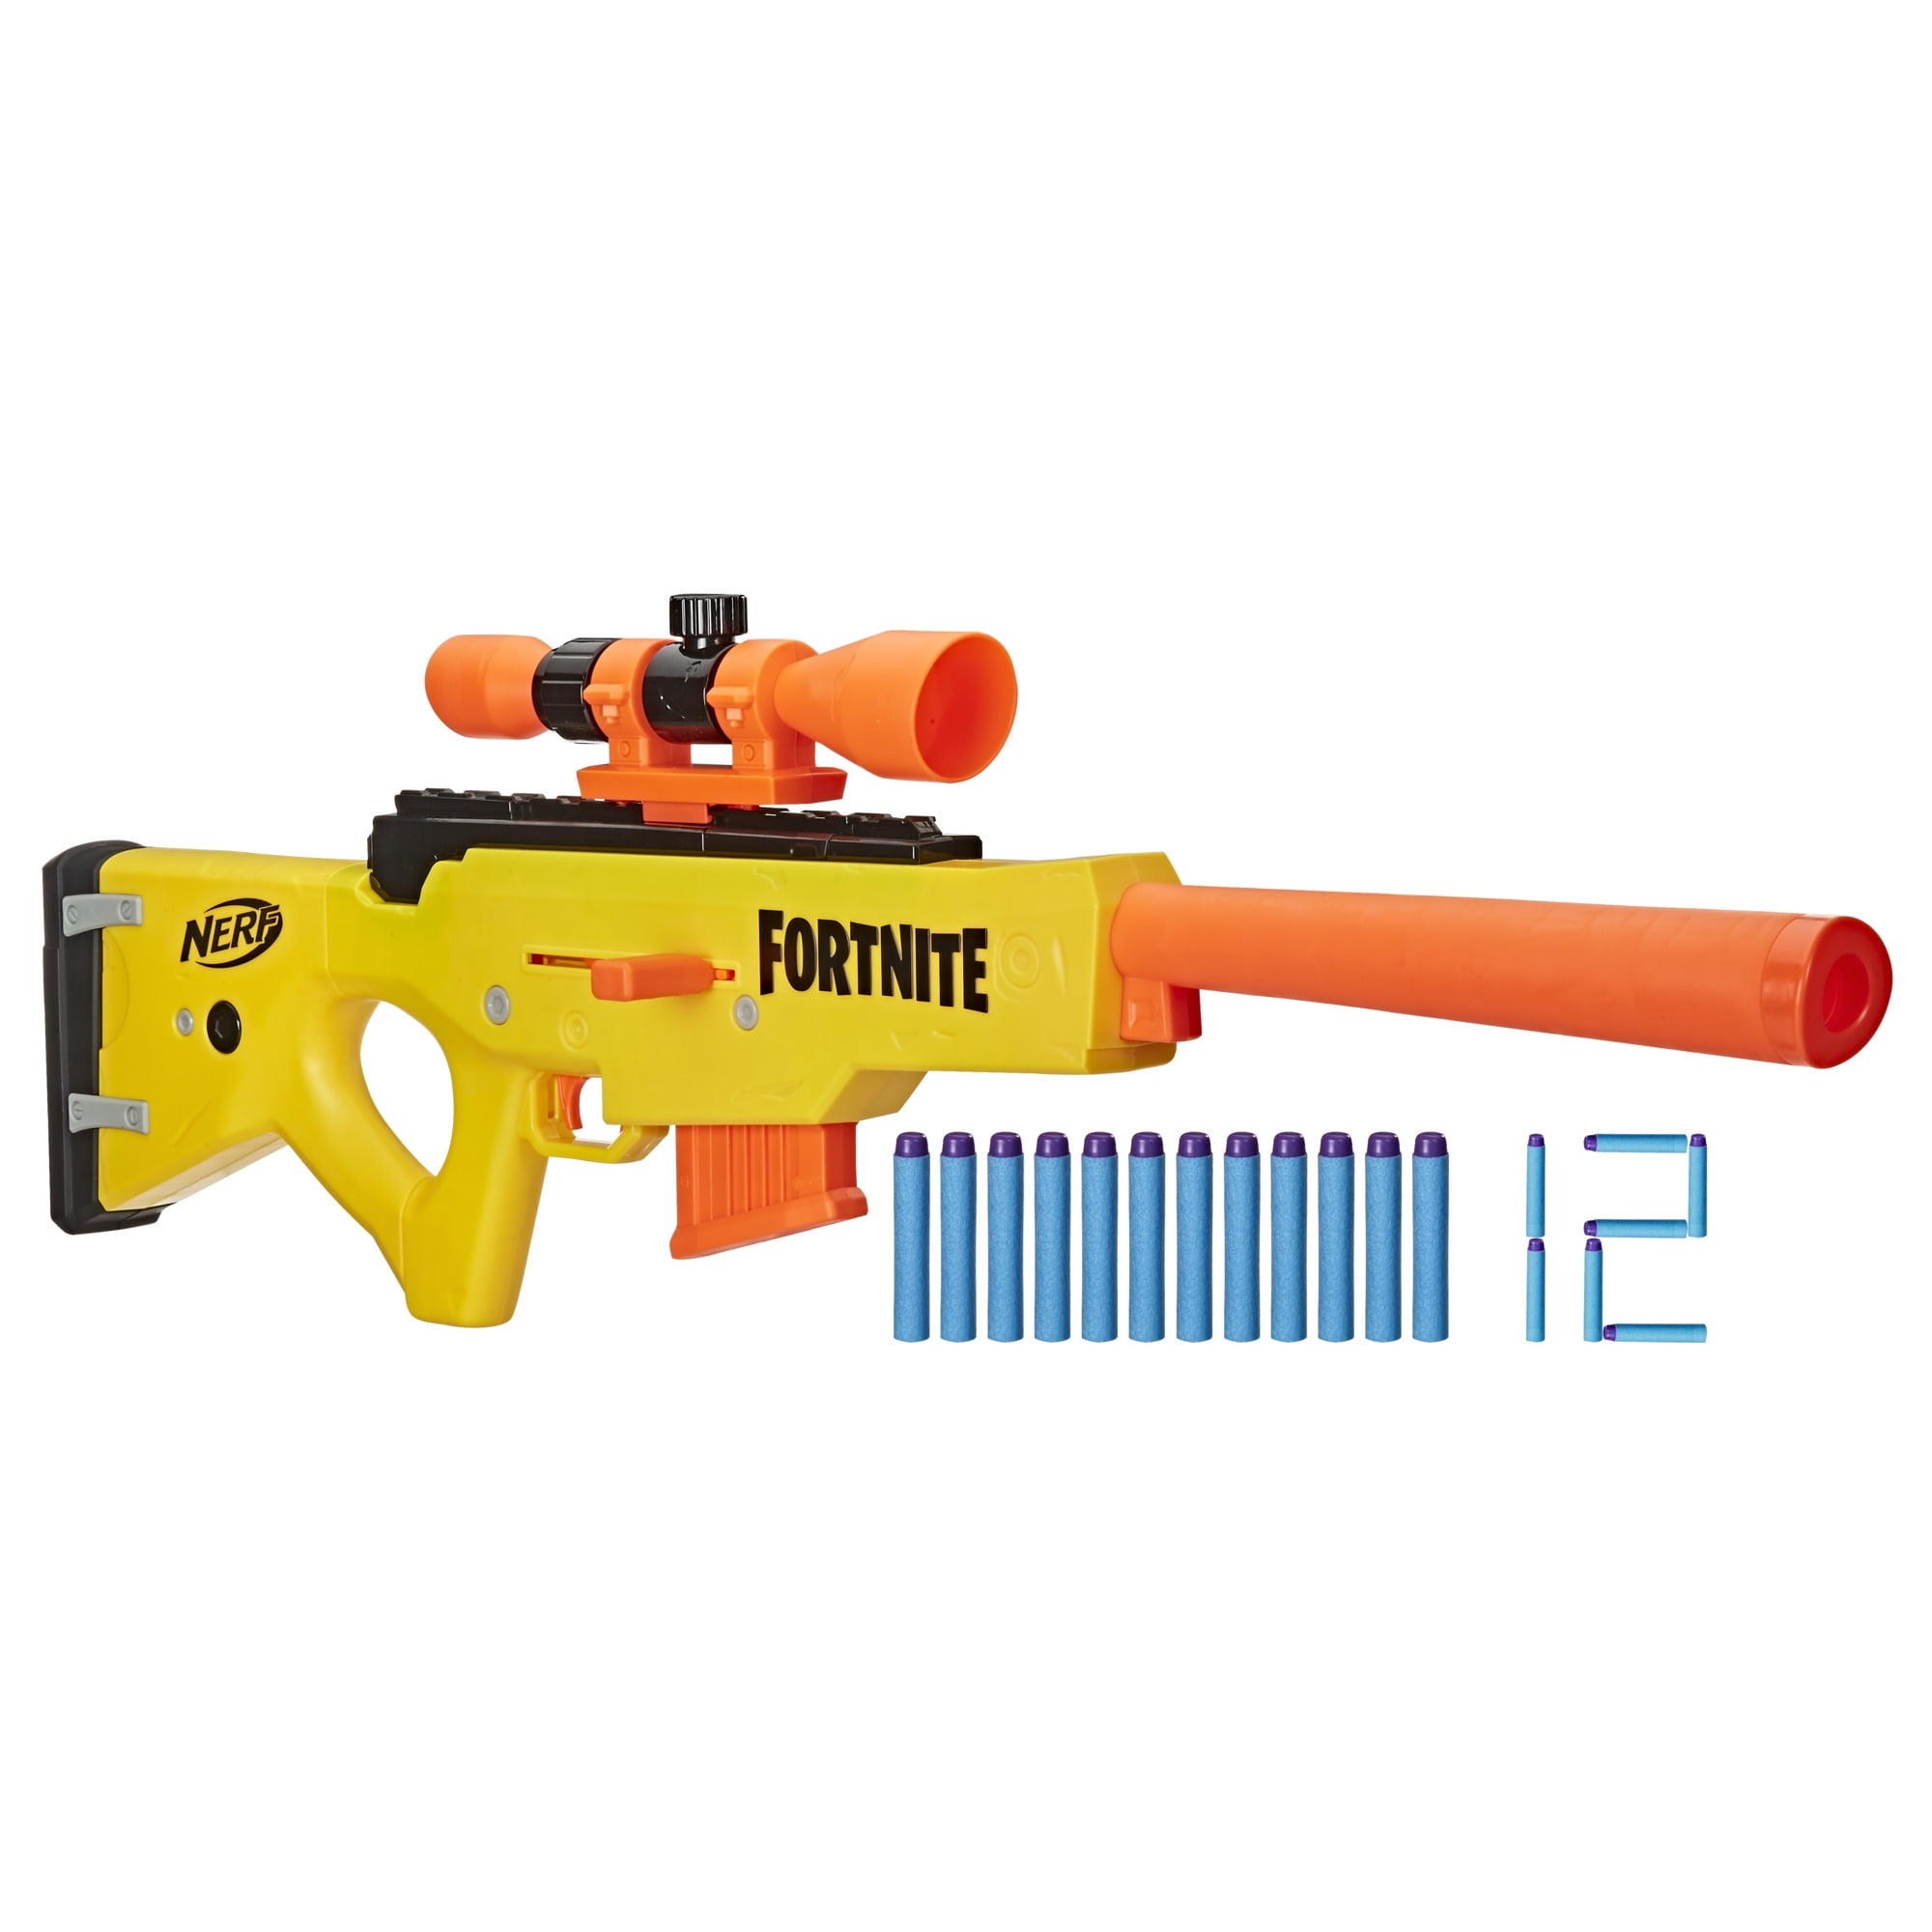 Nerf Fortnite BASR-L Blaster, Includes 12 Official Nerf Darts, for Ages 8 and Up